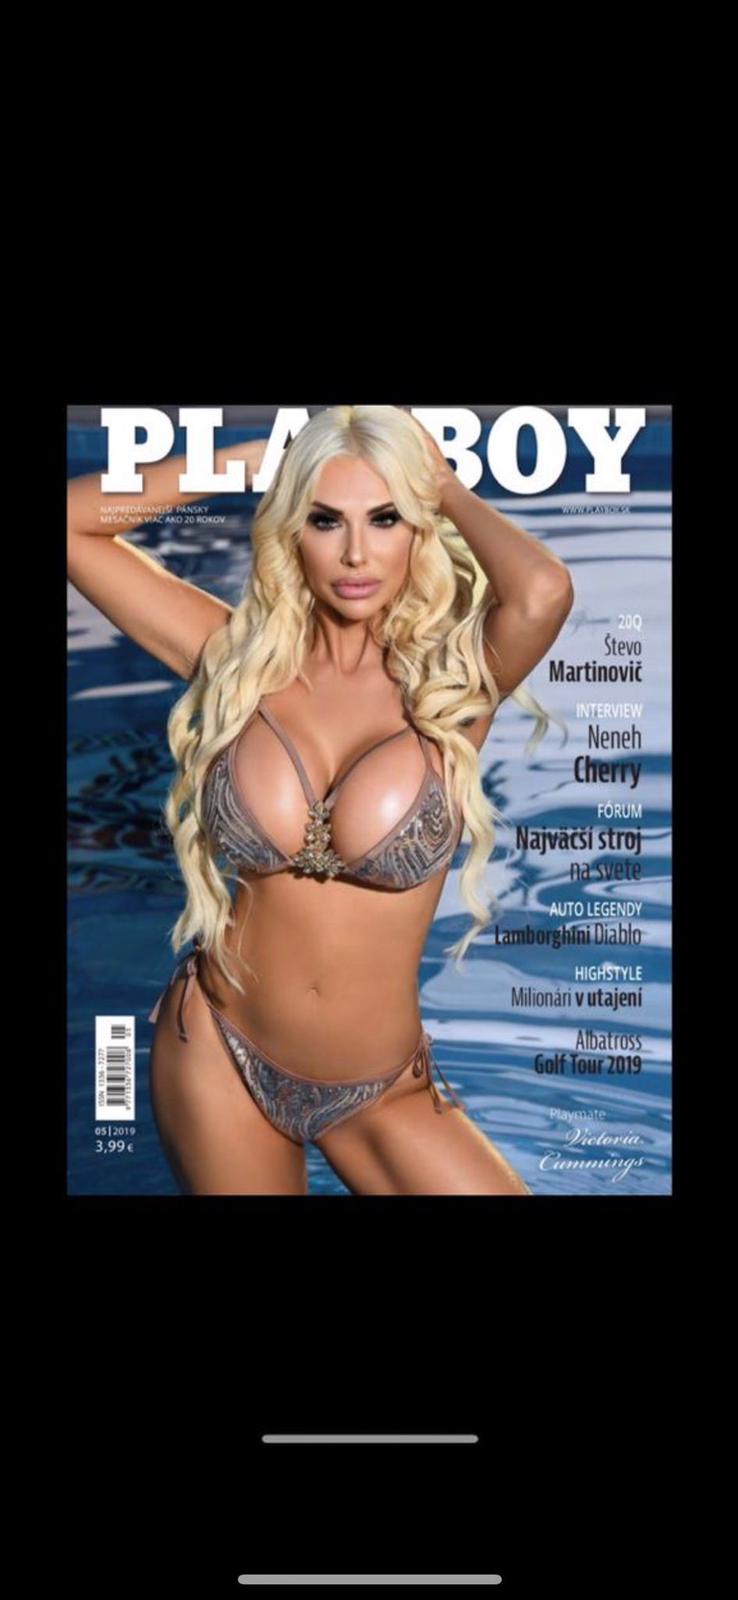 Tori Cummings on the front page of playboy in grey swimwear showing off her breasts.